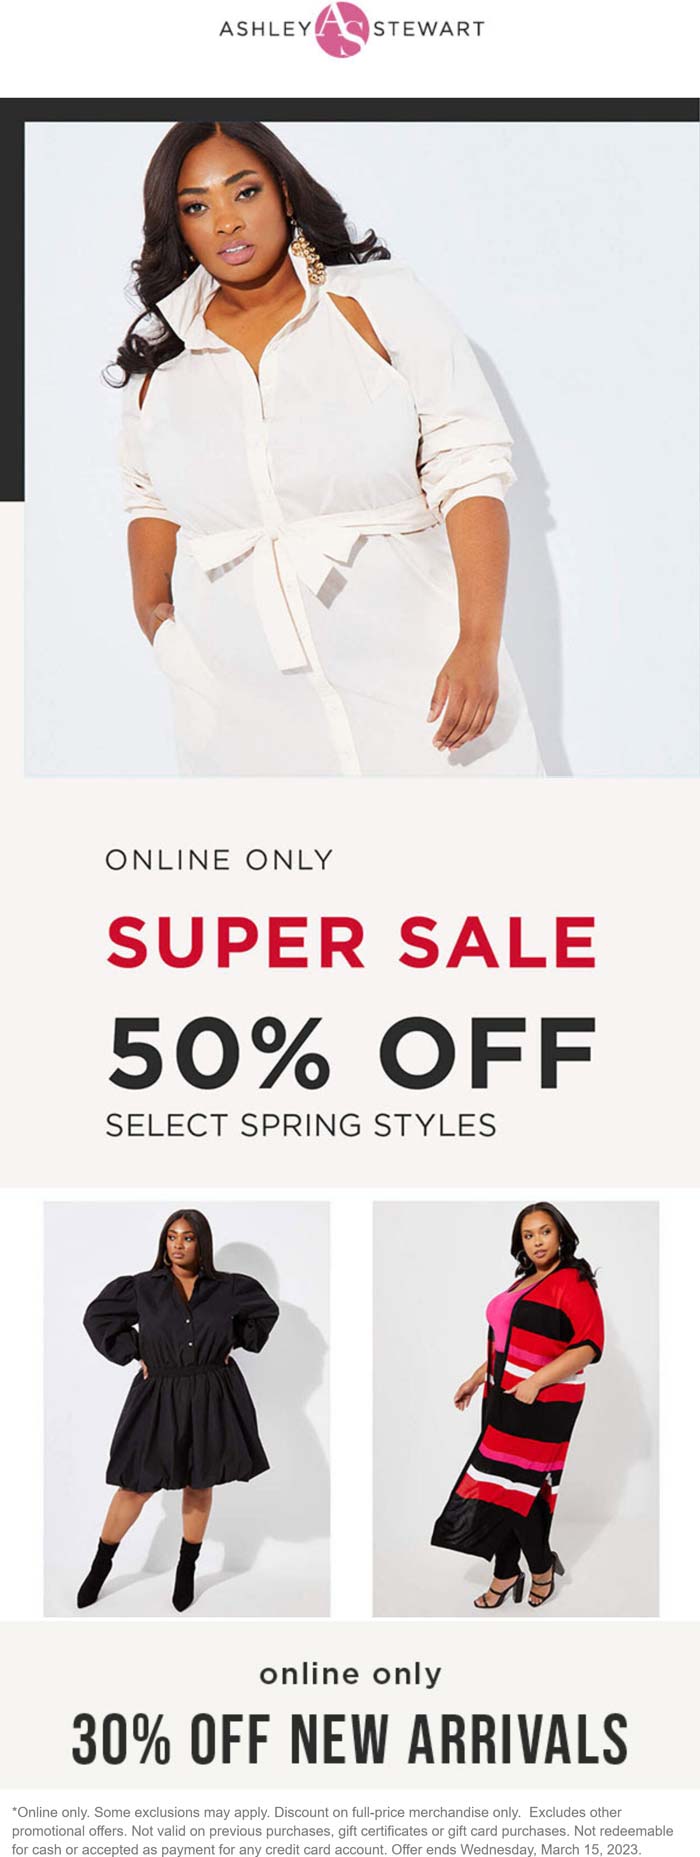 Ashley Stewart stores Coupon  50% off spring styles online today at Ashley Stewart #ashleystewart 